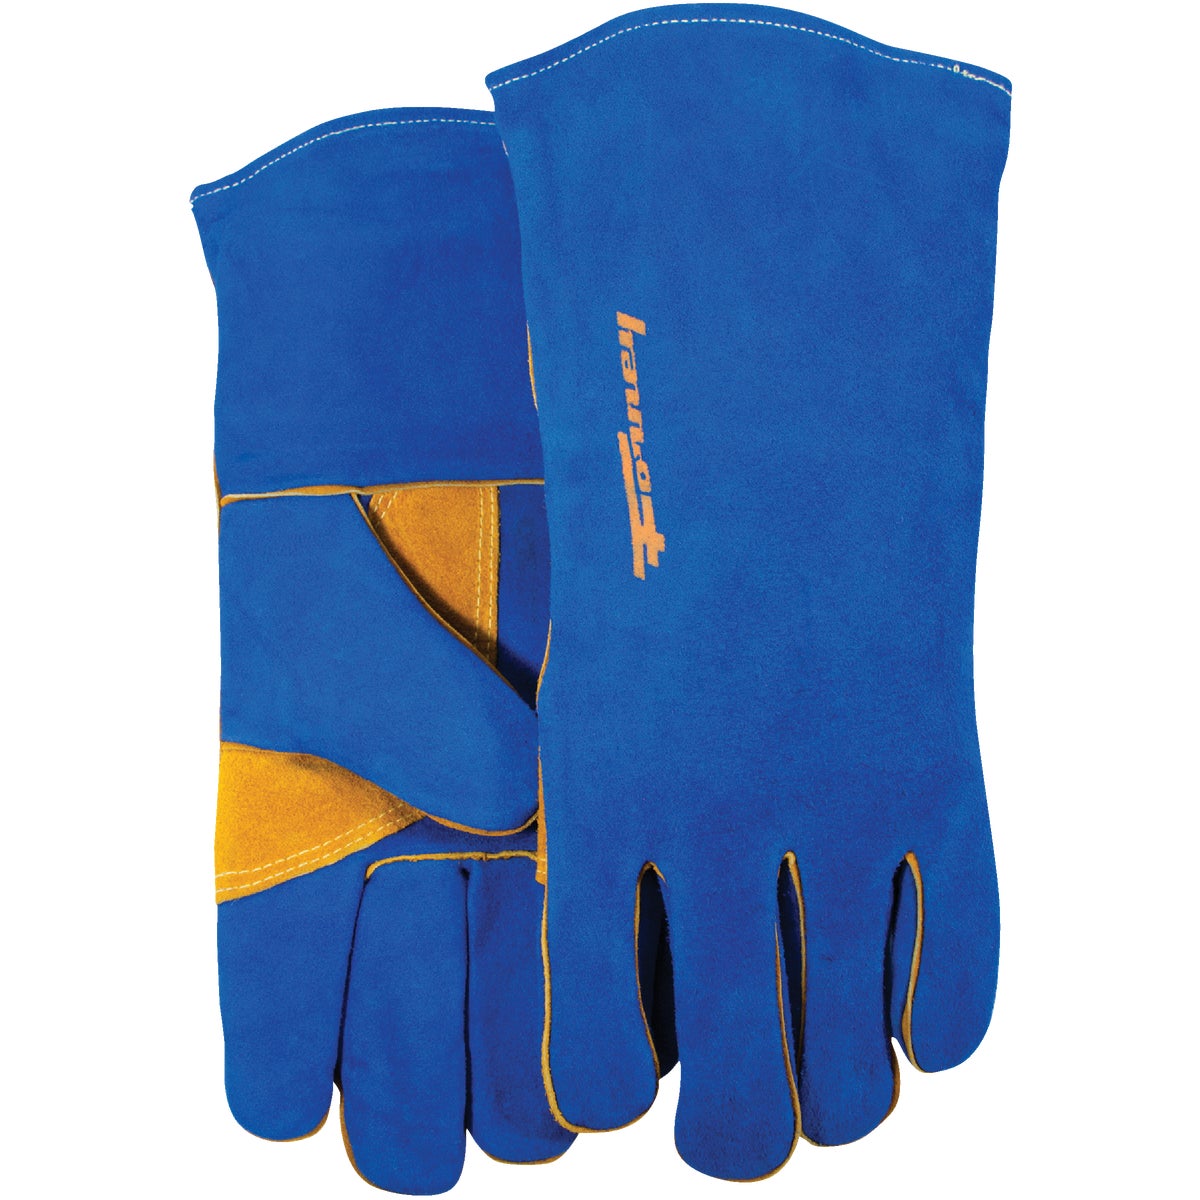 Forney Size 13-1/2 In. Blue Large Welding Gloves